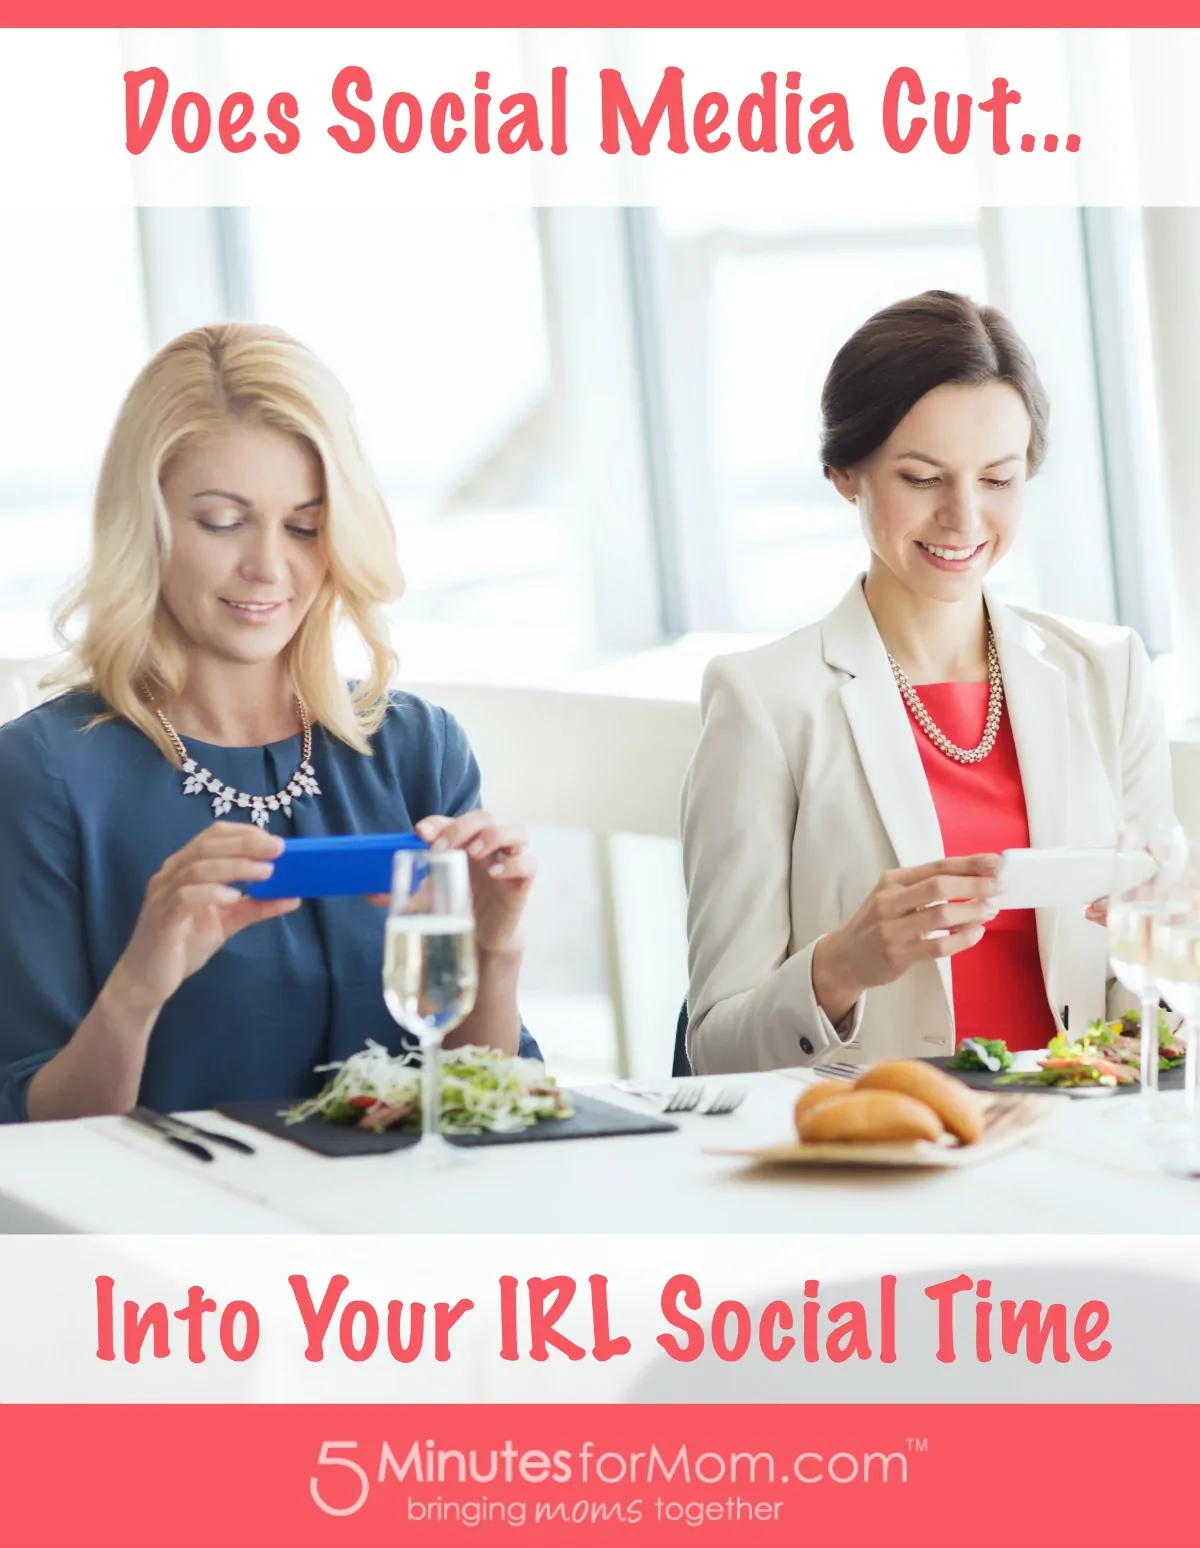 Does Social Media Cut Into Your IRL Social Time